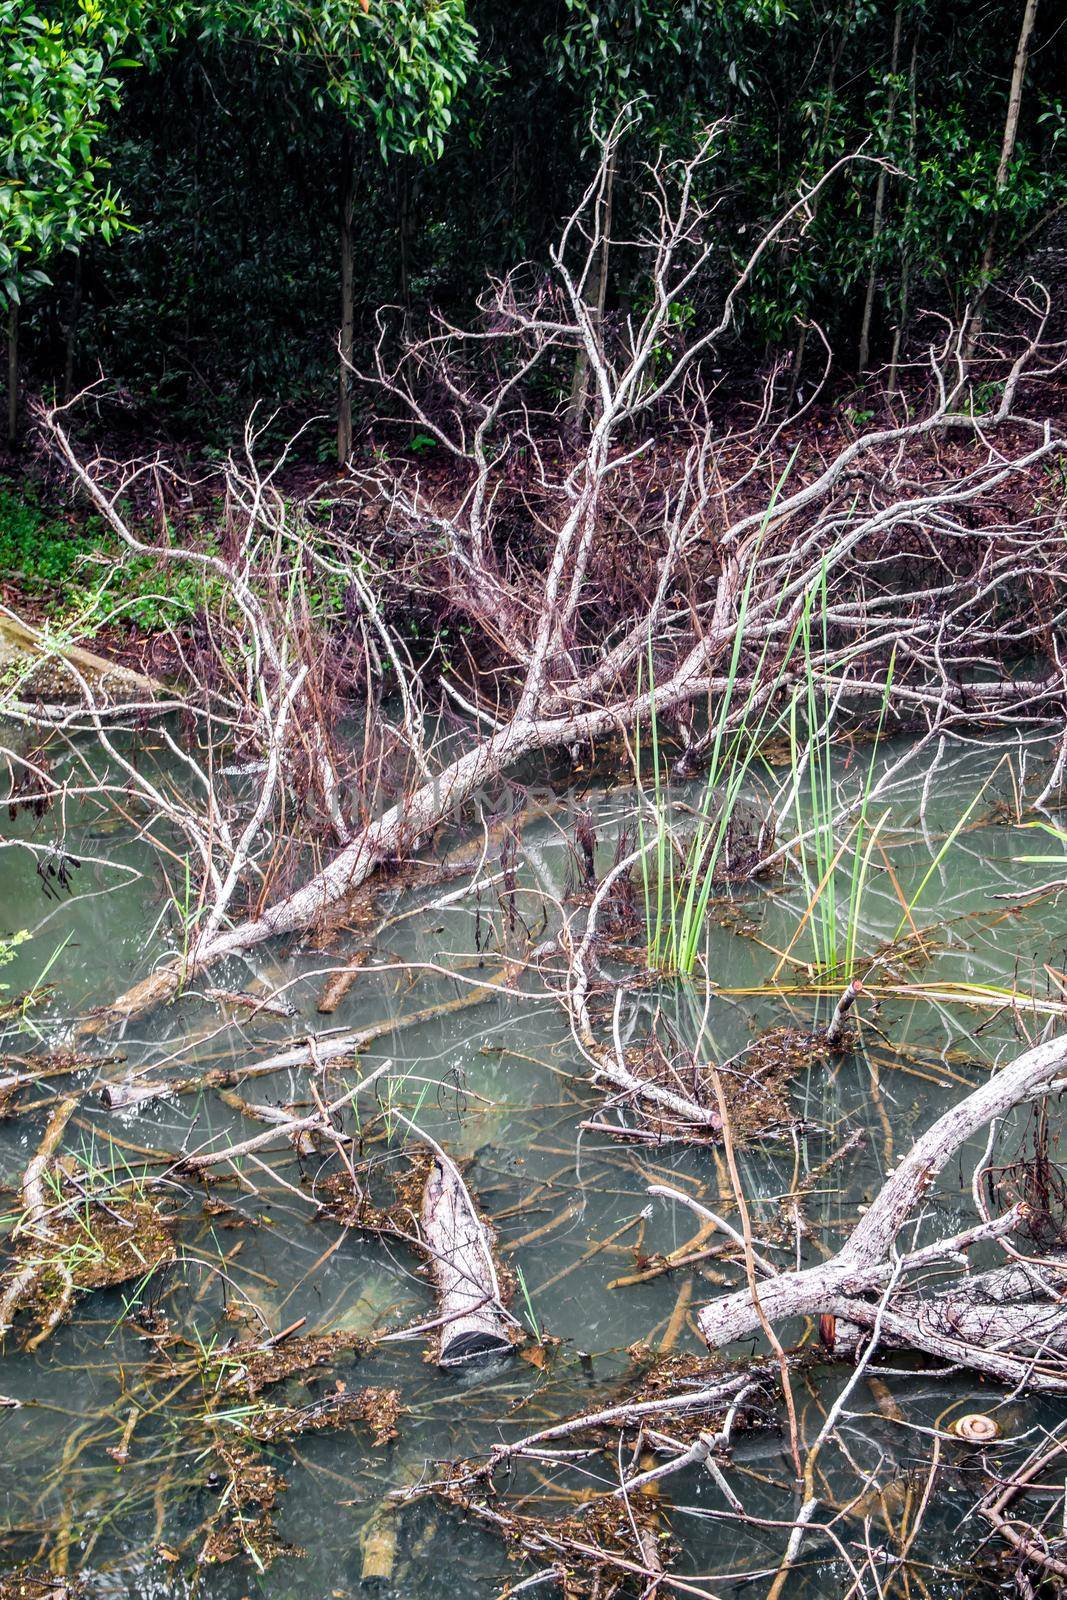 Remains of dead trees fall into the canal